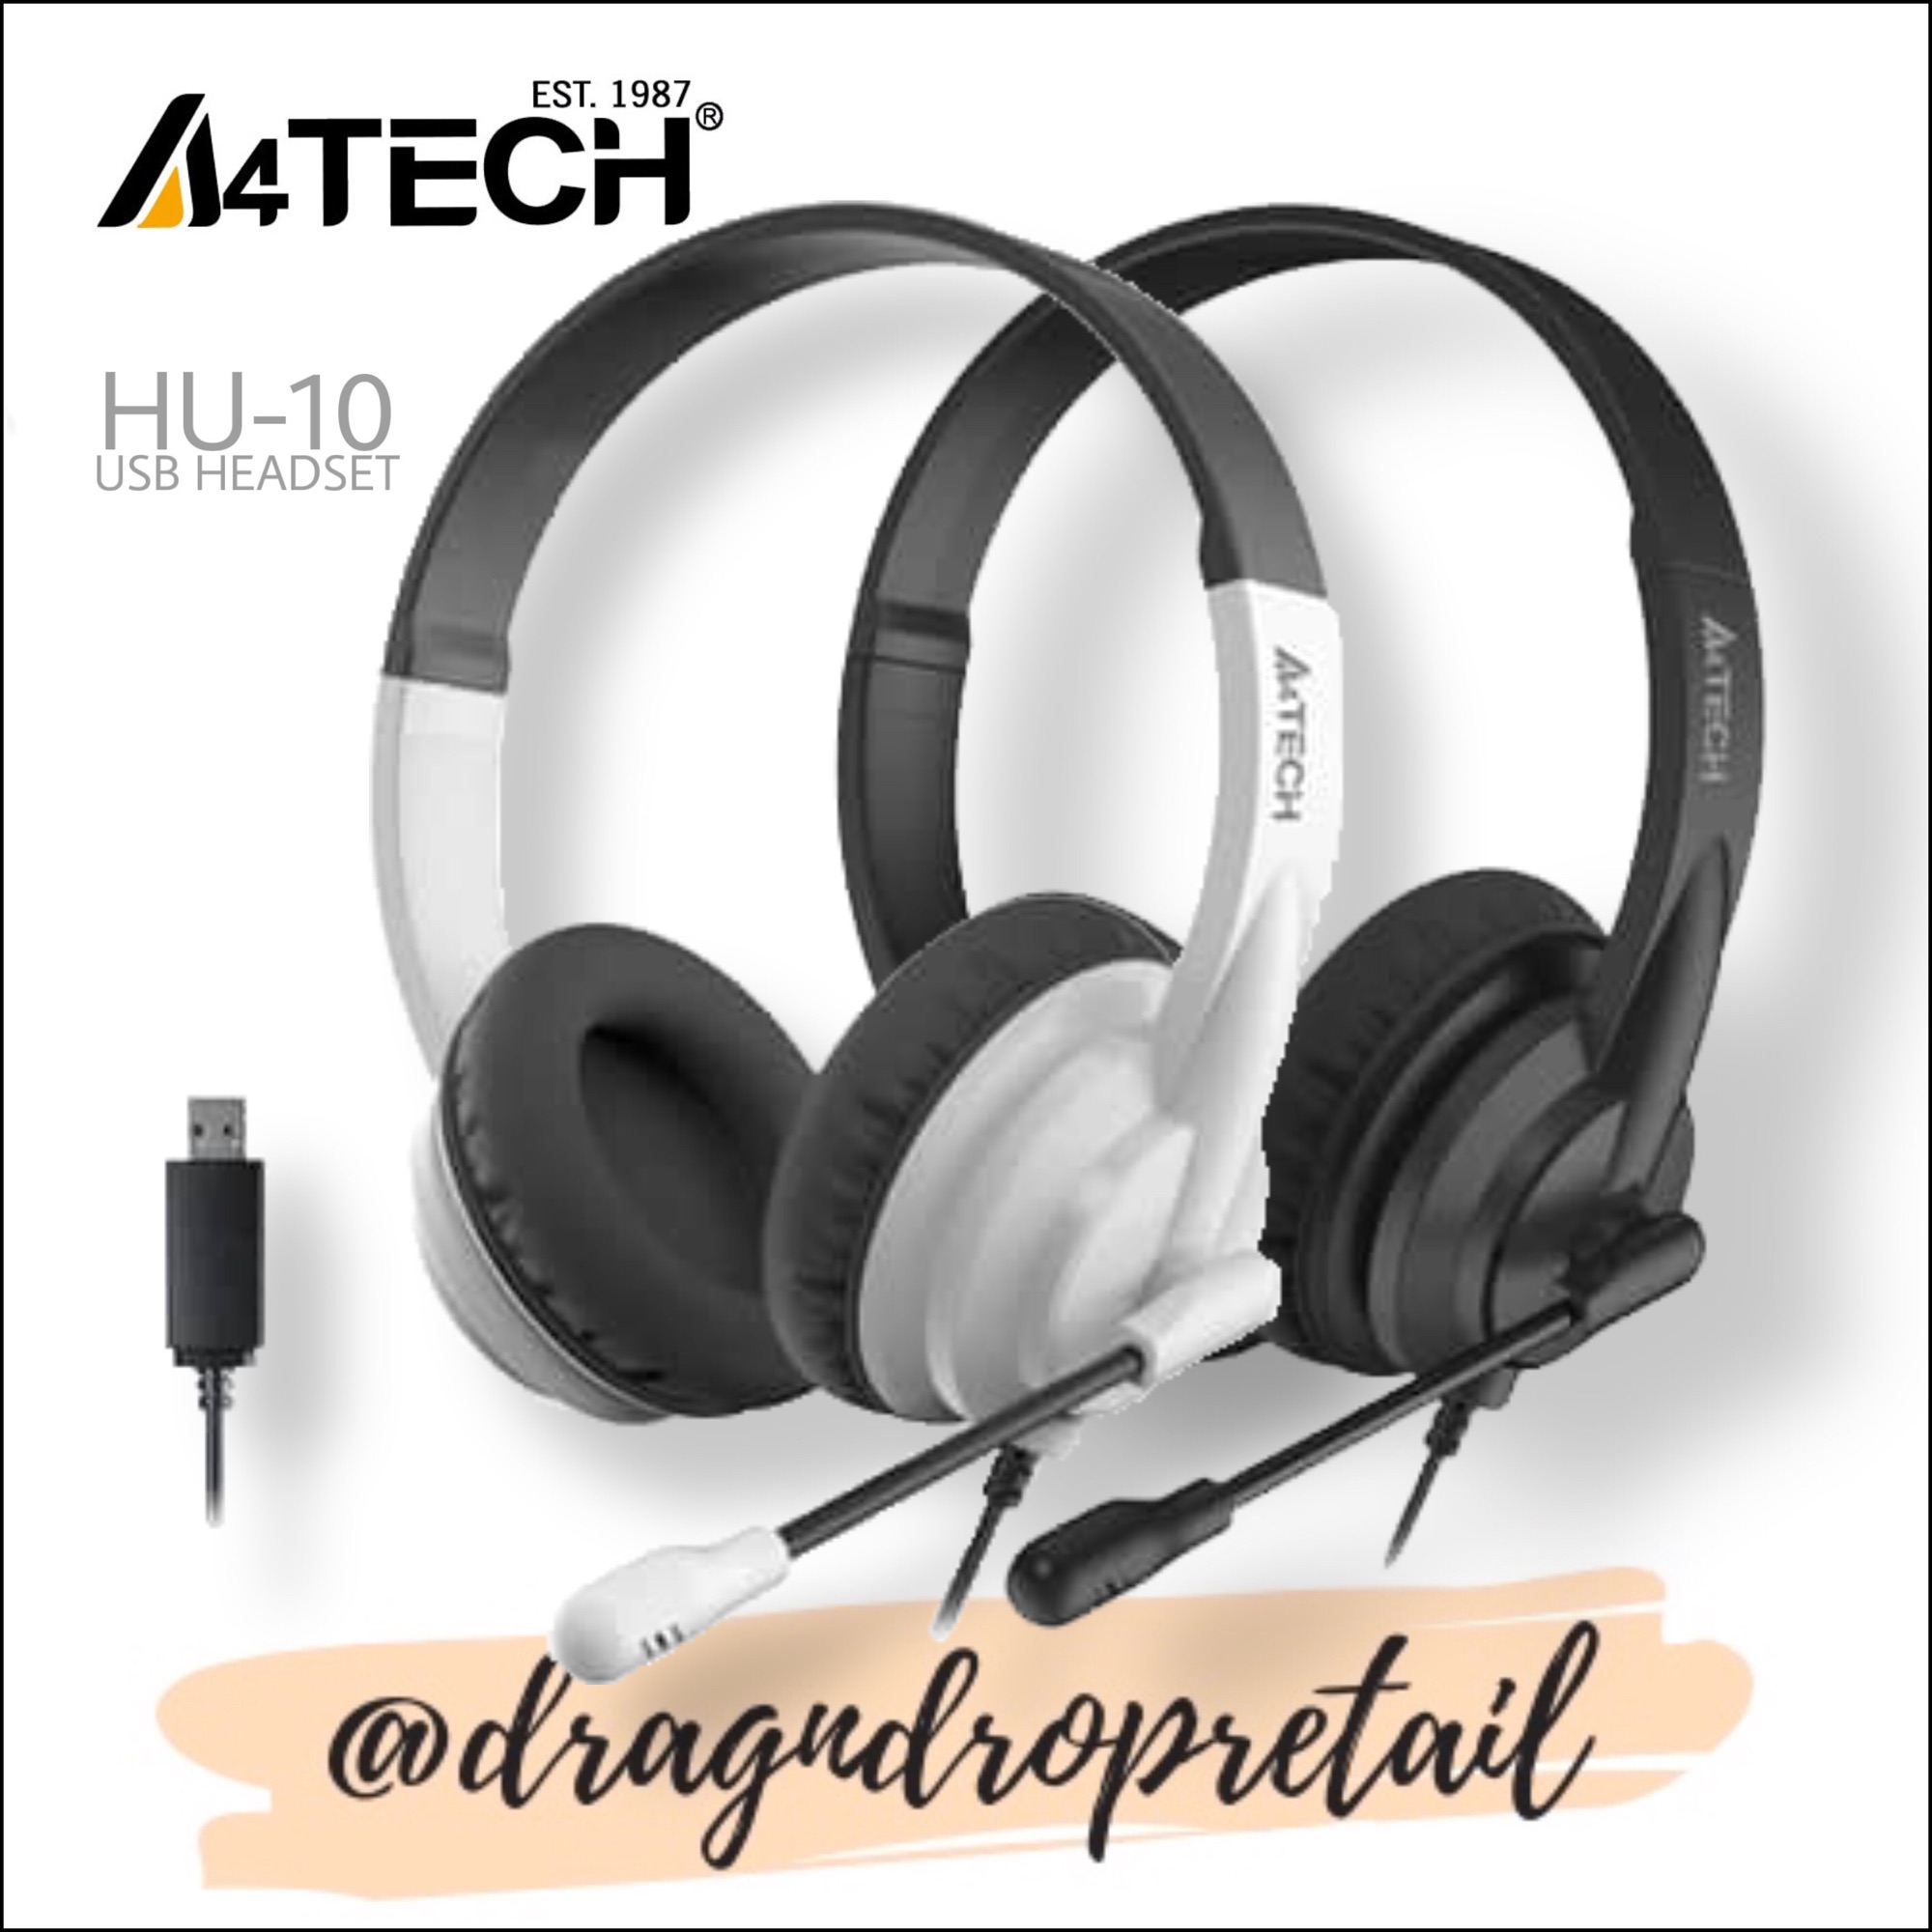 A4TECH HU-10 USB Headset with Noise Cancelling Microphone